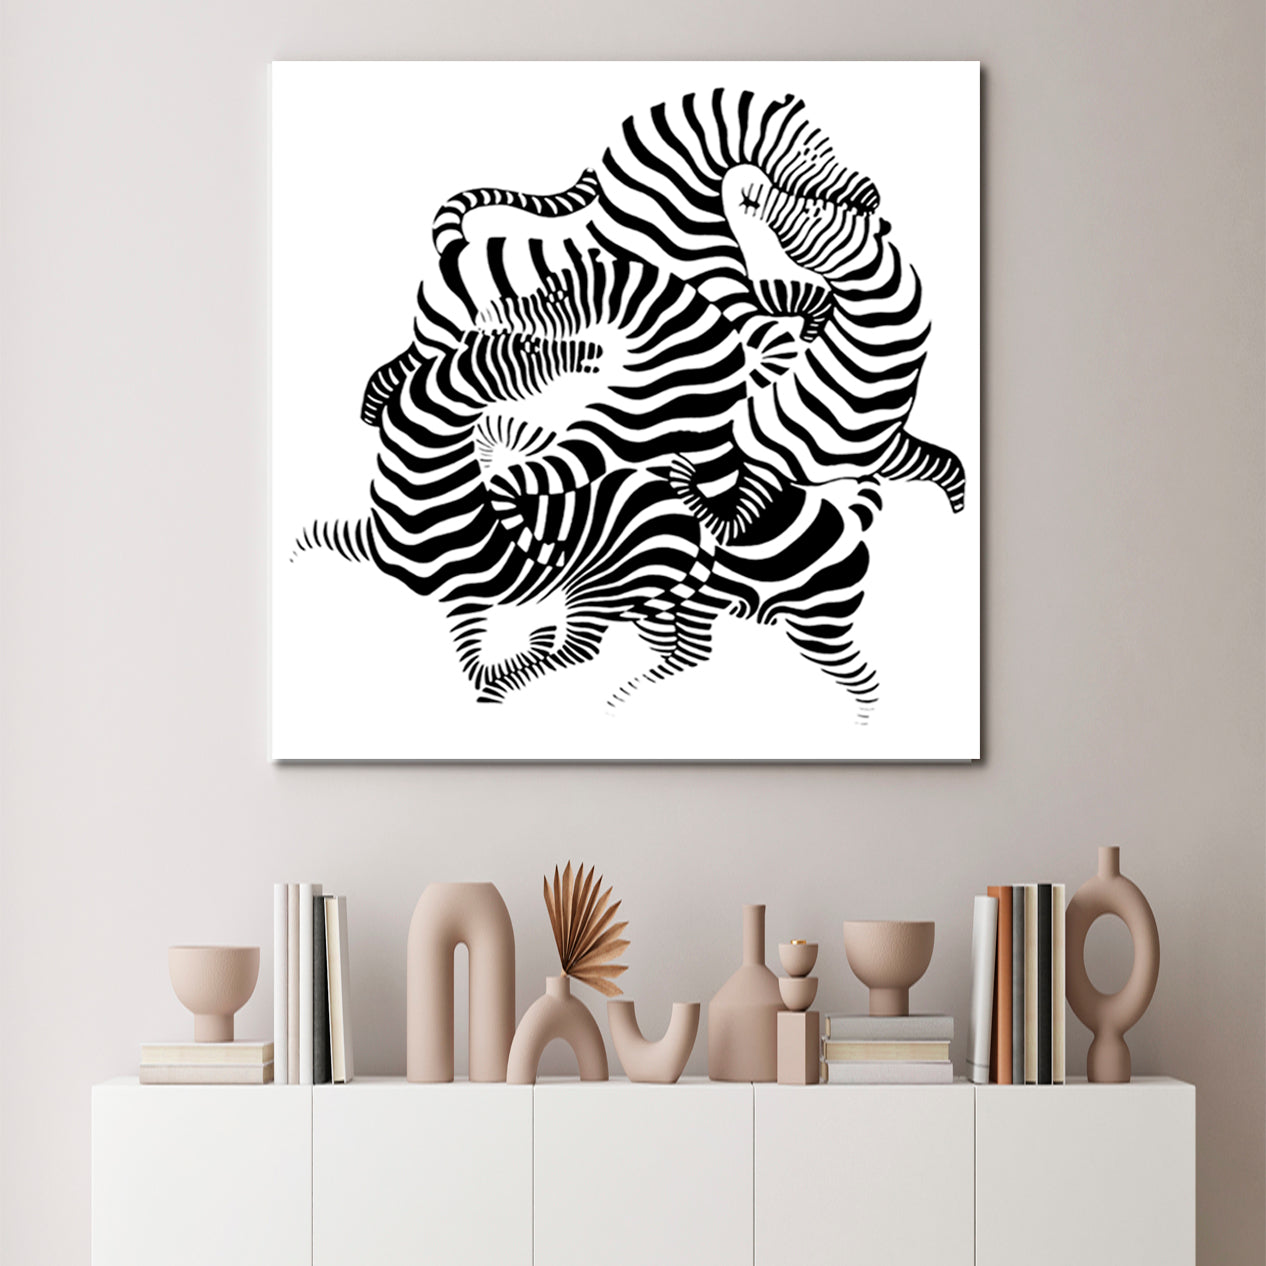 OPTICAL ILLUSION OP-ART Abstract Black White Zebra Entwined Together Fine Art Artesty   